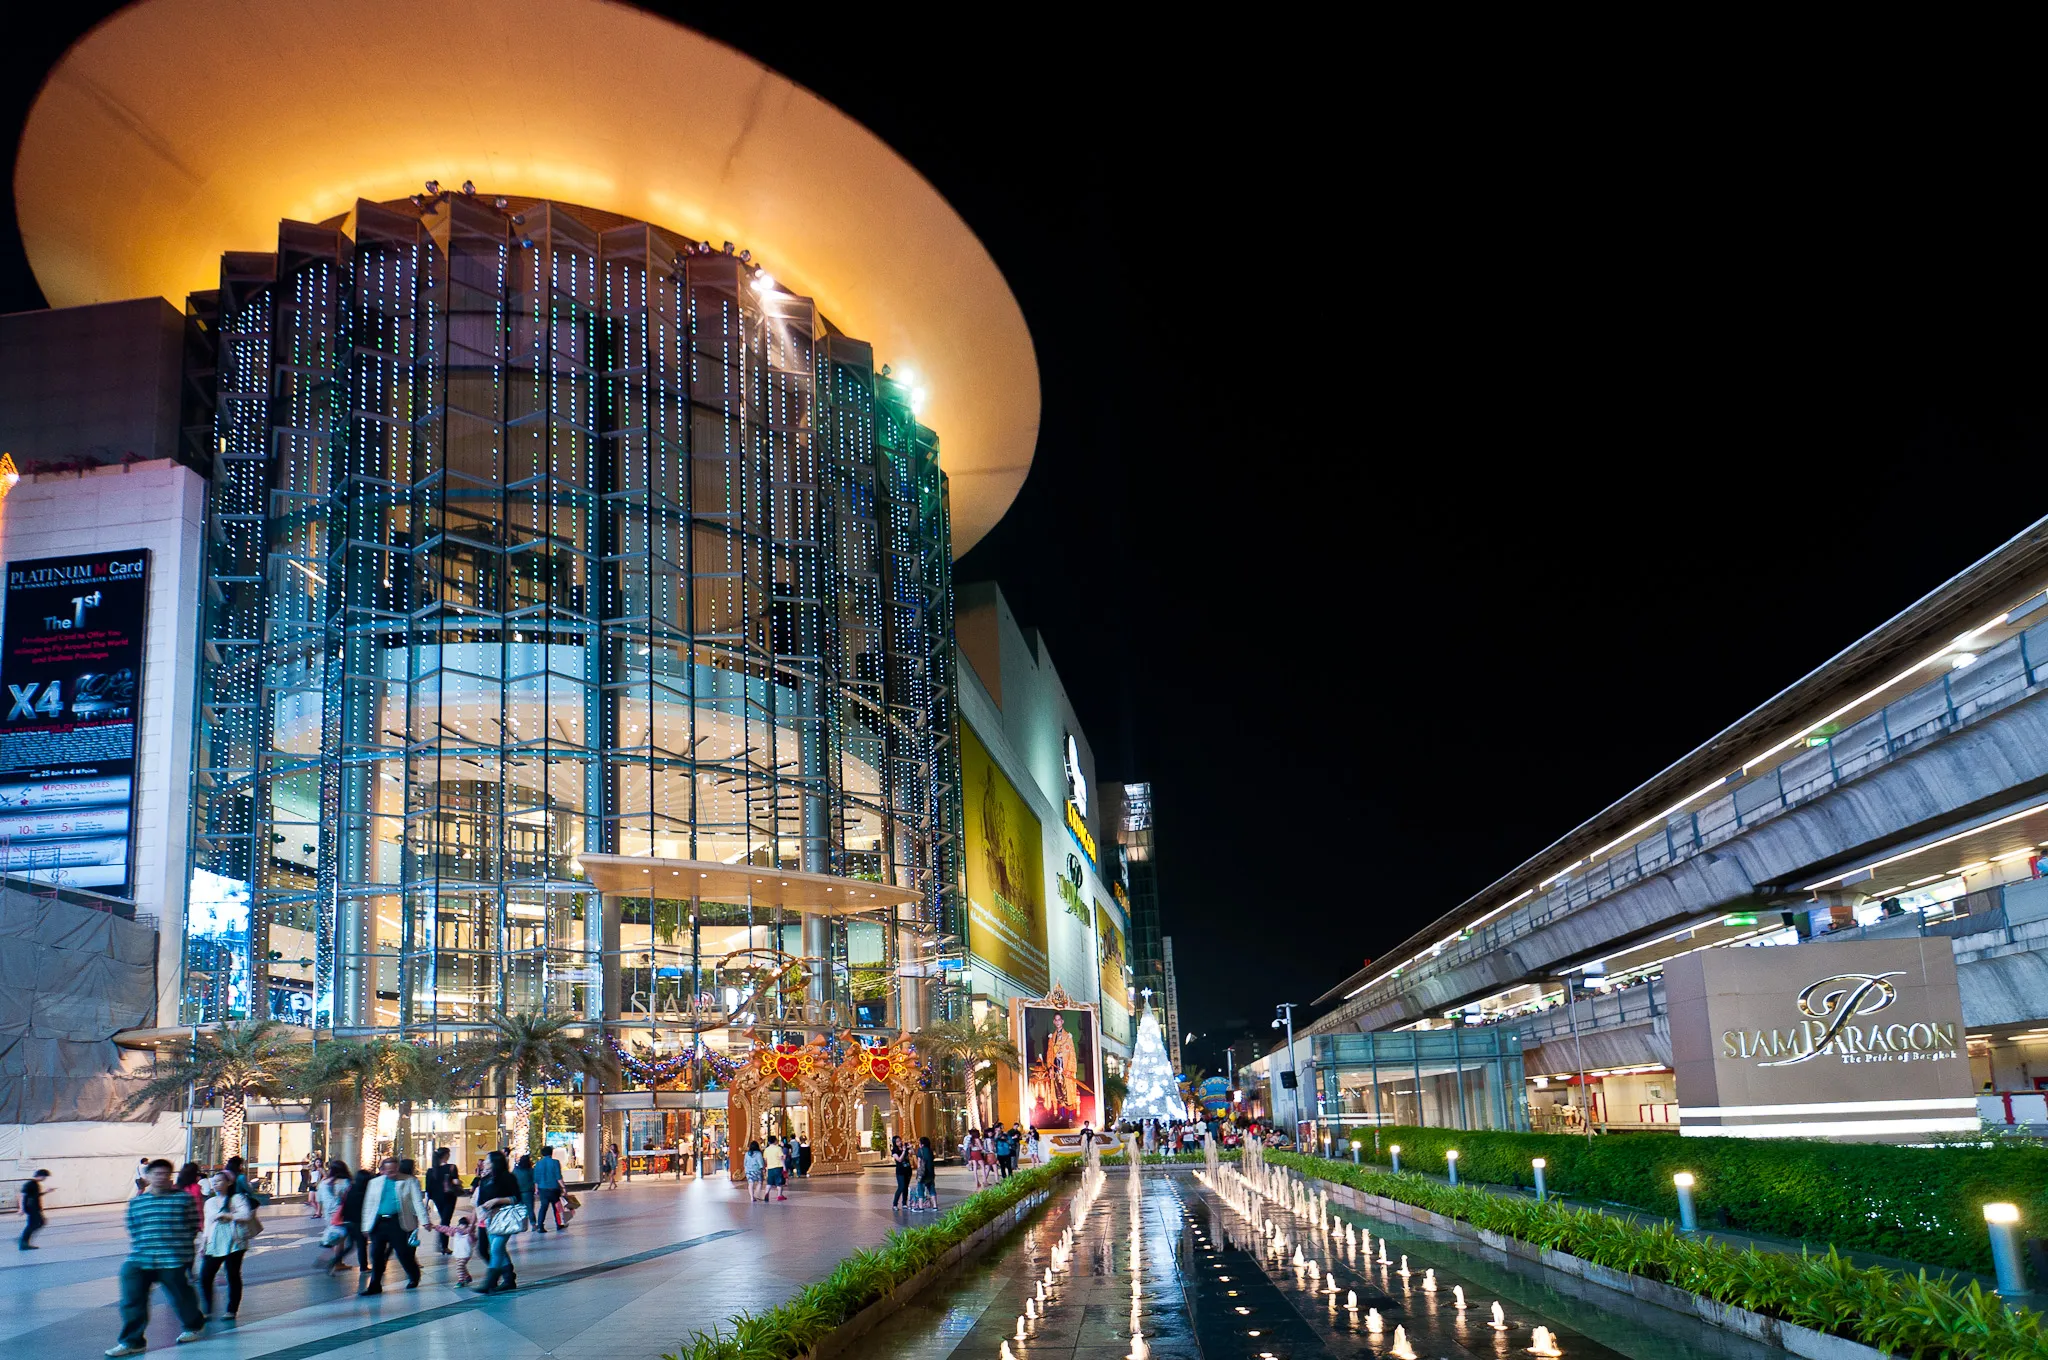 Siam Paragon in Thailand, central_asia | Fragrance,Shoes,Accessories,Clothes,Gifts,Cosmetics,Swimwear - Country Helper